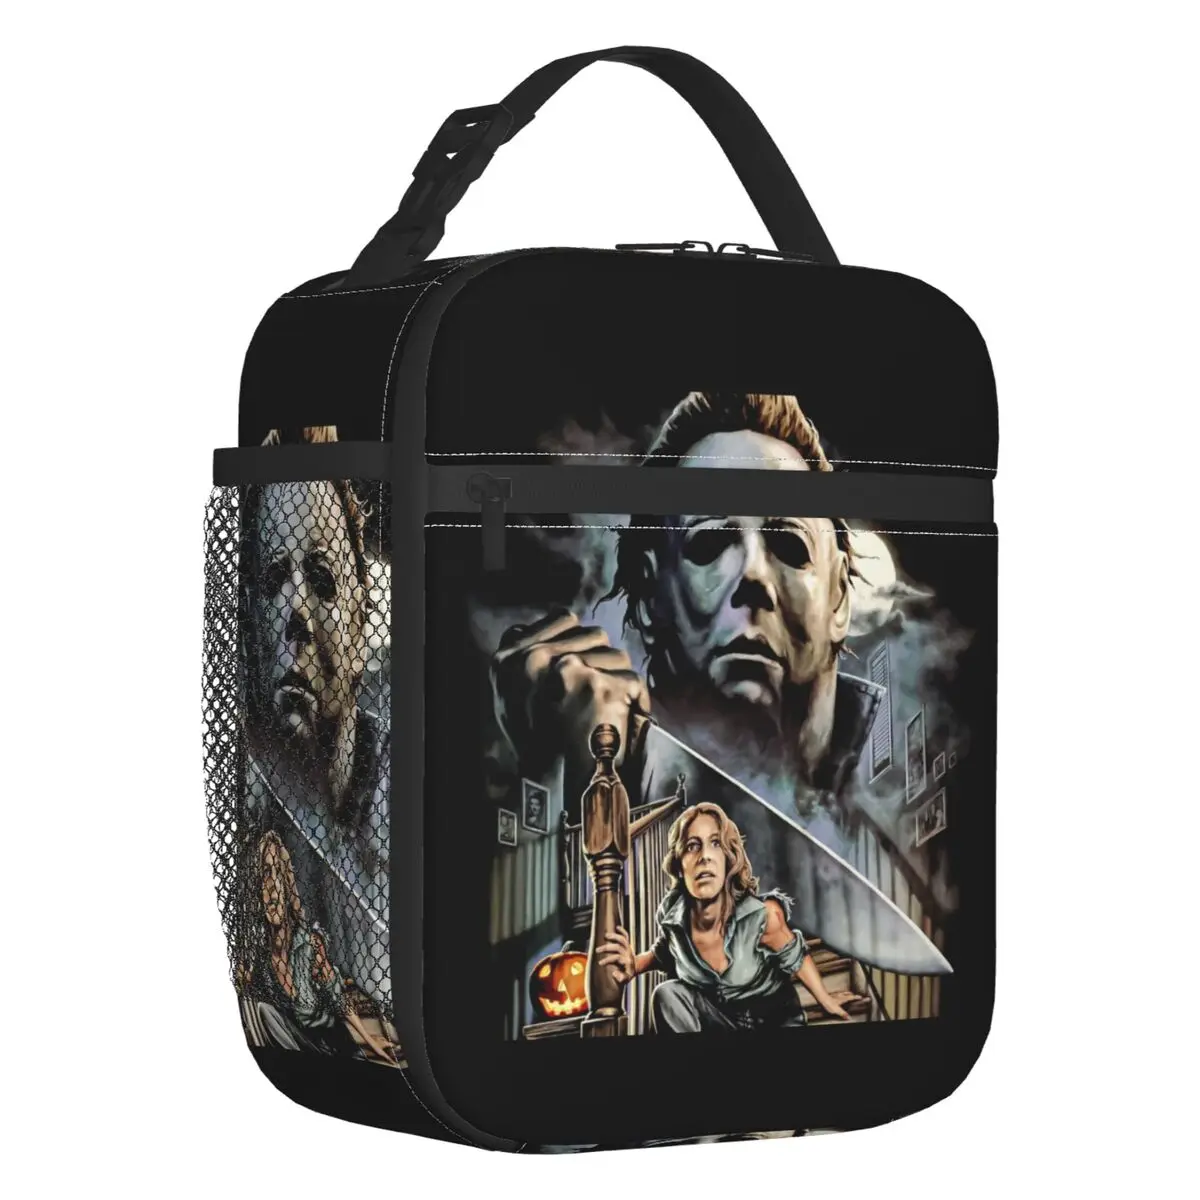 https://ae01.alicdn.com/kf/S59b6eab799e74dadaaff281456f7b744k/Custom-Michael-Myers-Knives-Art-Lunch-Bag-Men-Women-Thermal-Cooler-Insulated-Lunch-Boxes-for-Kids.jpg